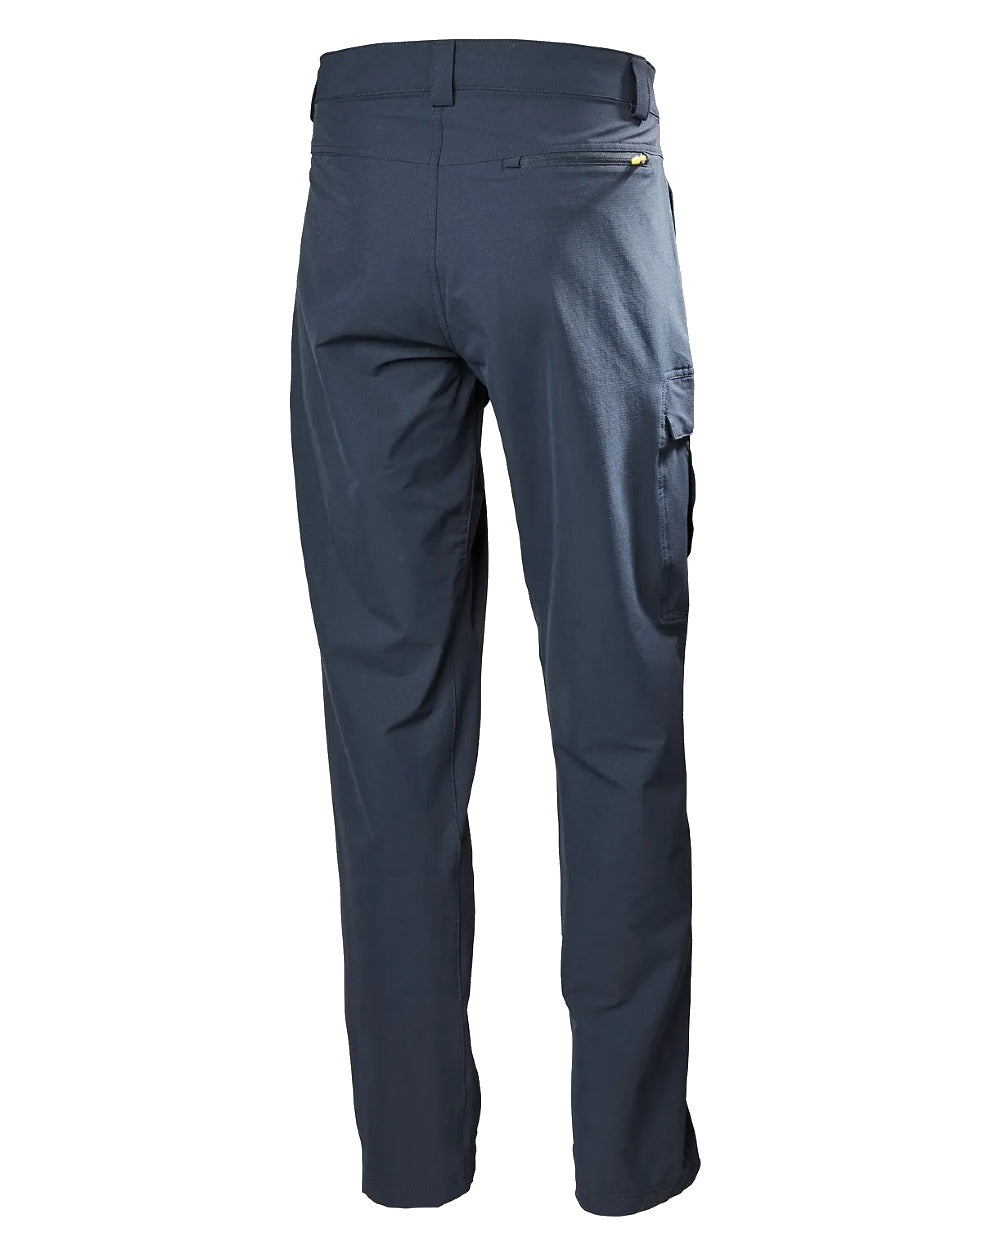 Navy coloured Helly Hansen Mens HH quick dry cargo pant on white background 